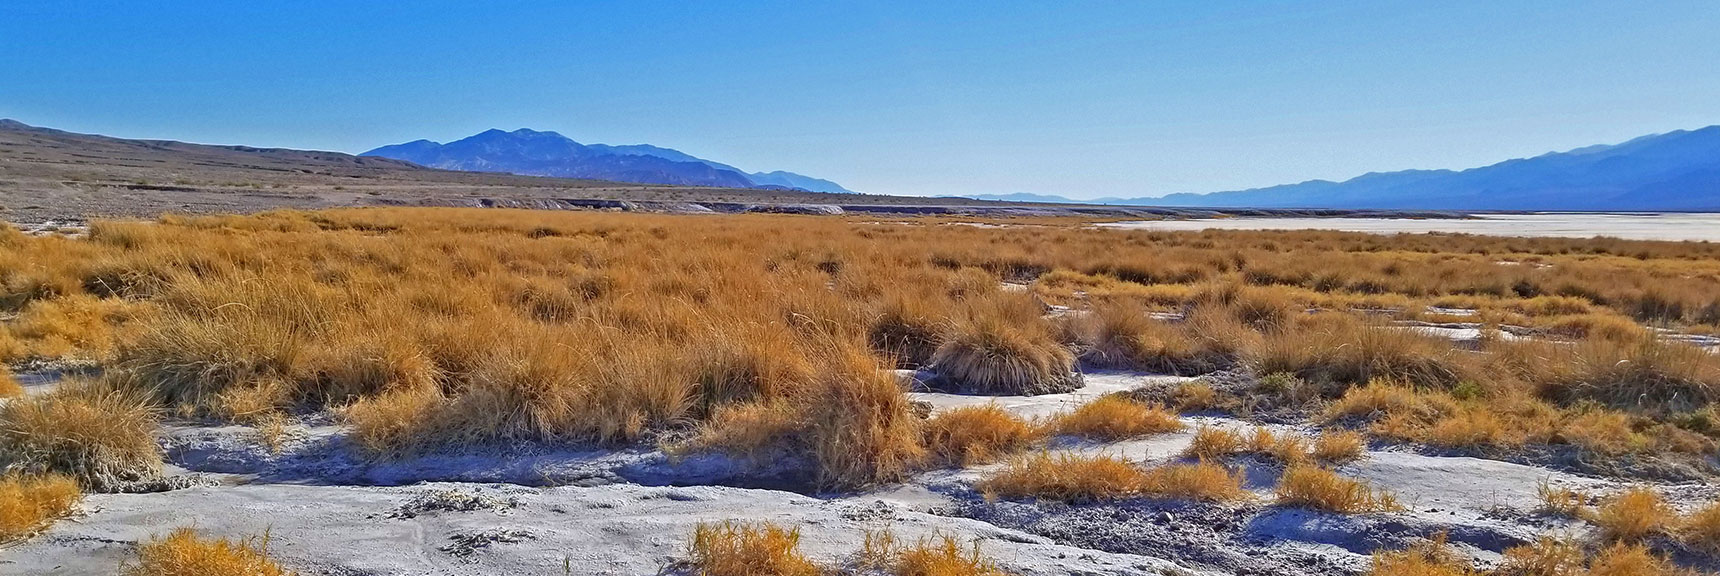 Salt Grass Growing Out of Soil Many Times Saltier Than the Ocean. | Return of Lake Manly (Lake in Death Valley) | Death Valley National Park, California